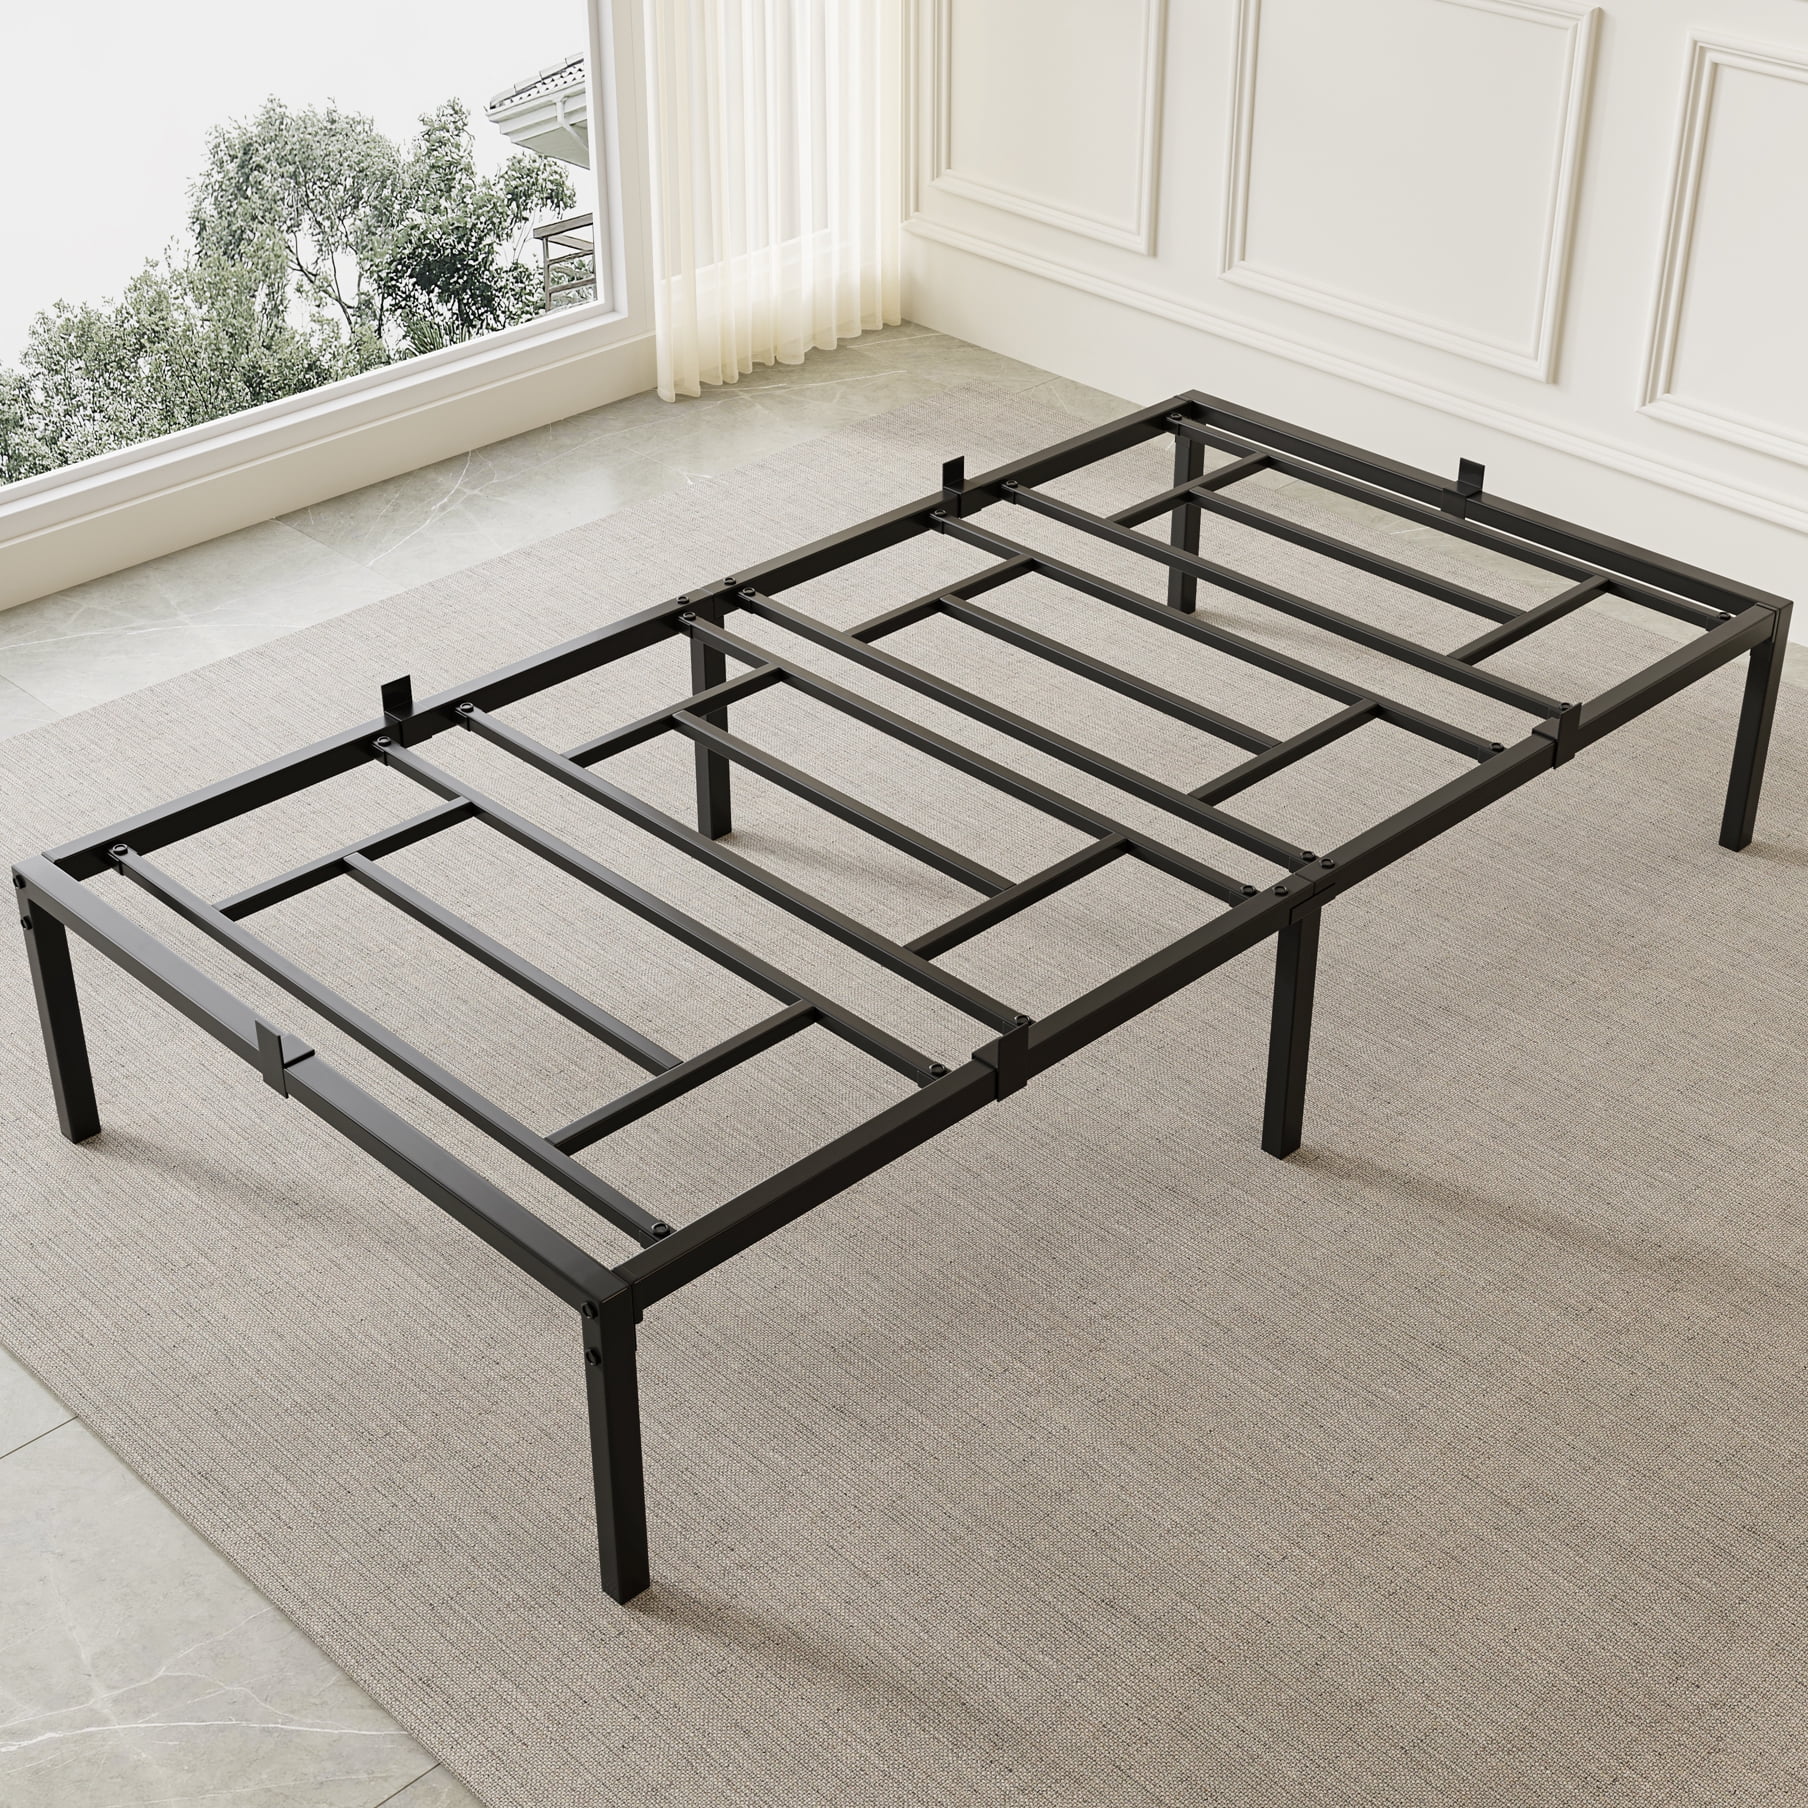 14 High Metal Platform Bed Frame Twin, Twin Bed Without Box Spring